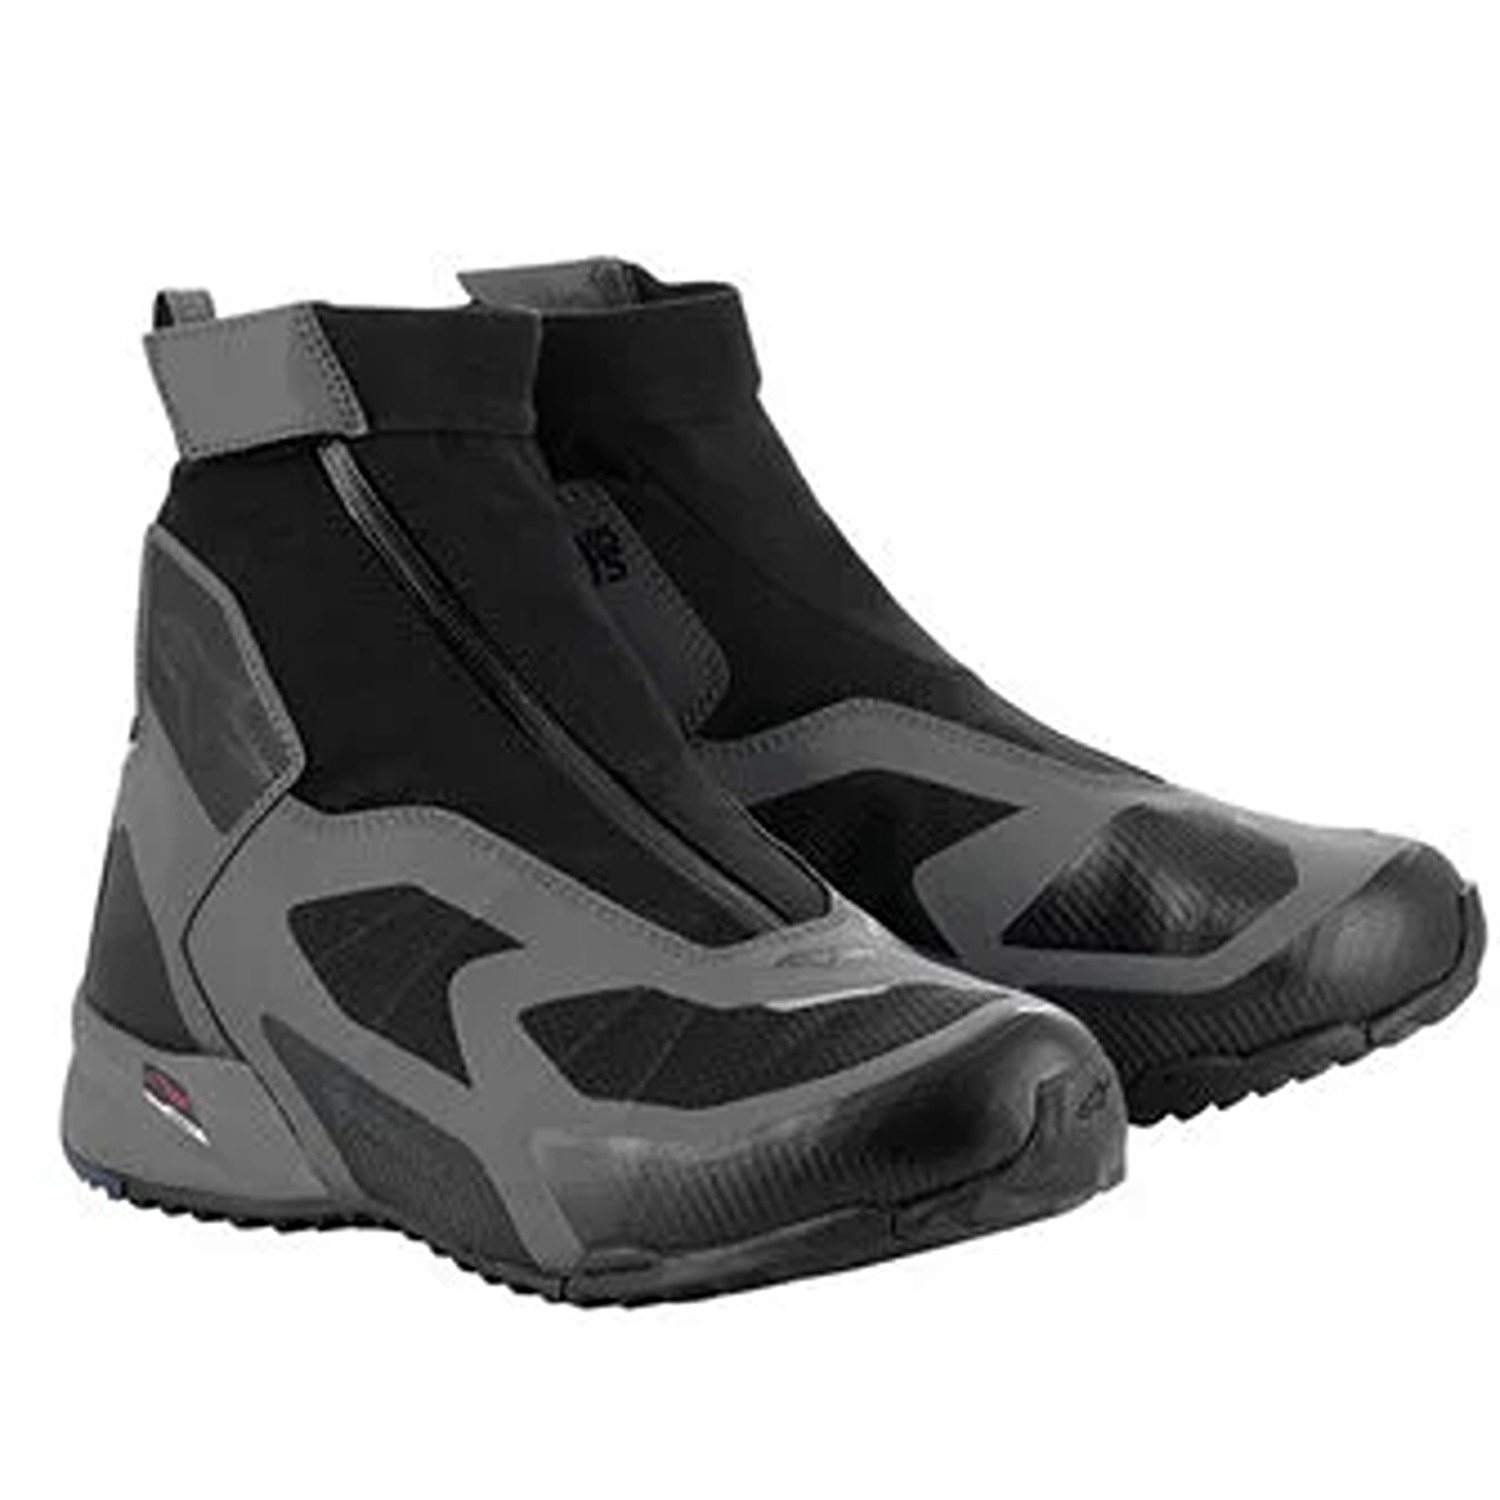 Image of EU Alpinestars CR-8 Gore-Tex Shoes Black Mid Gray Bright Red Taille US 7